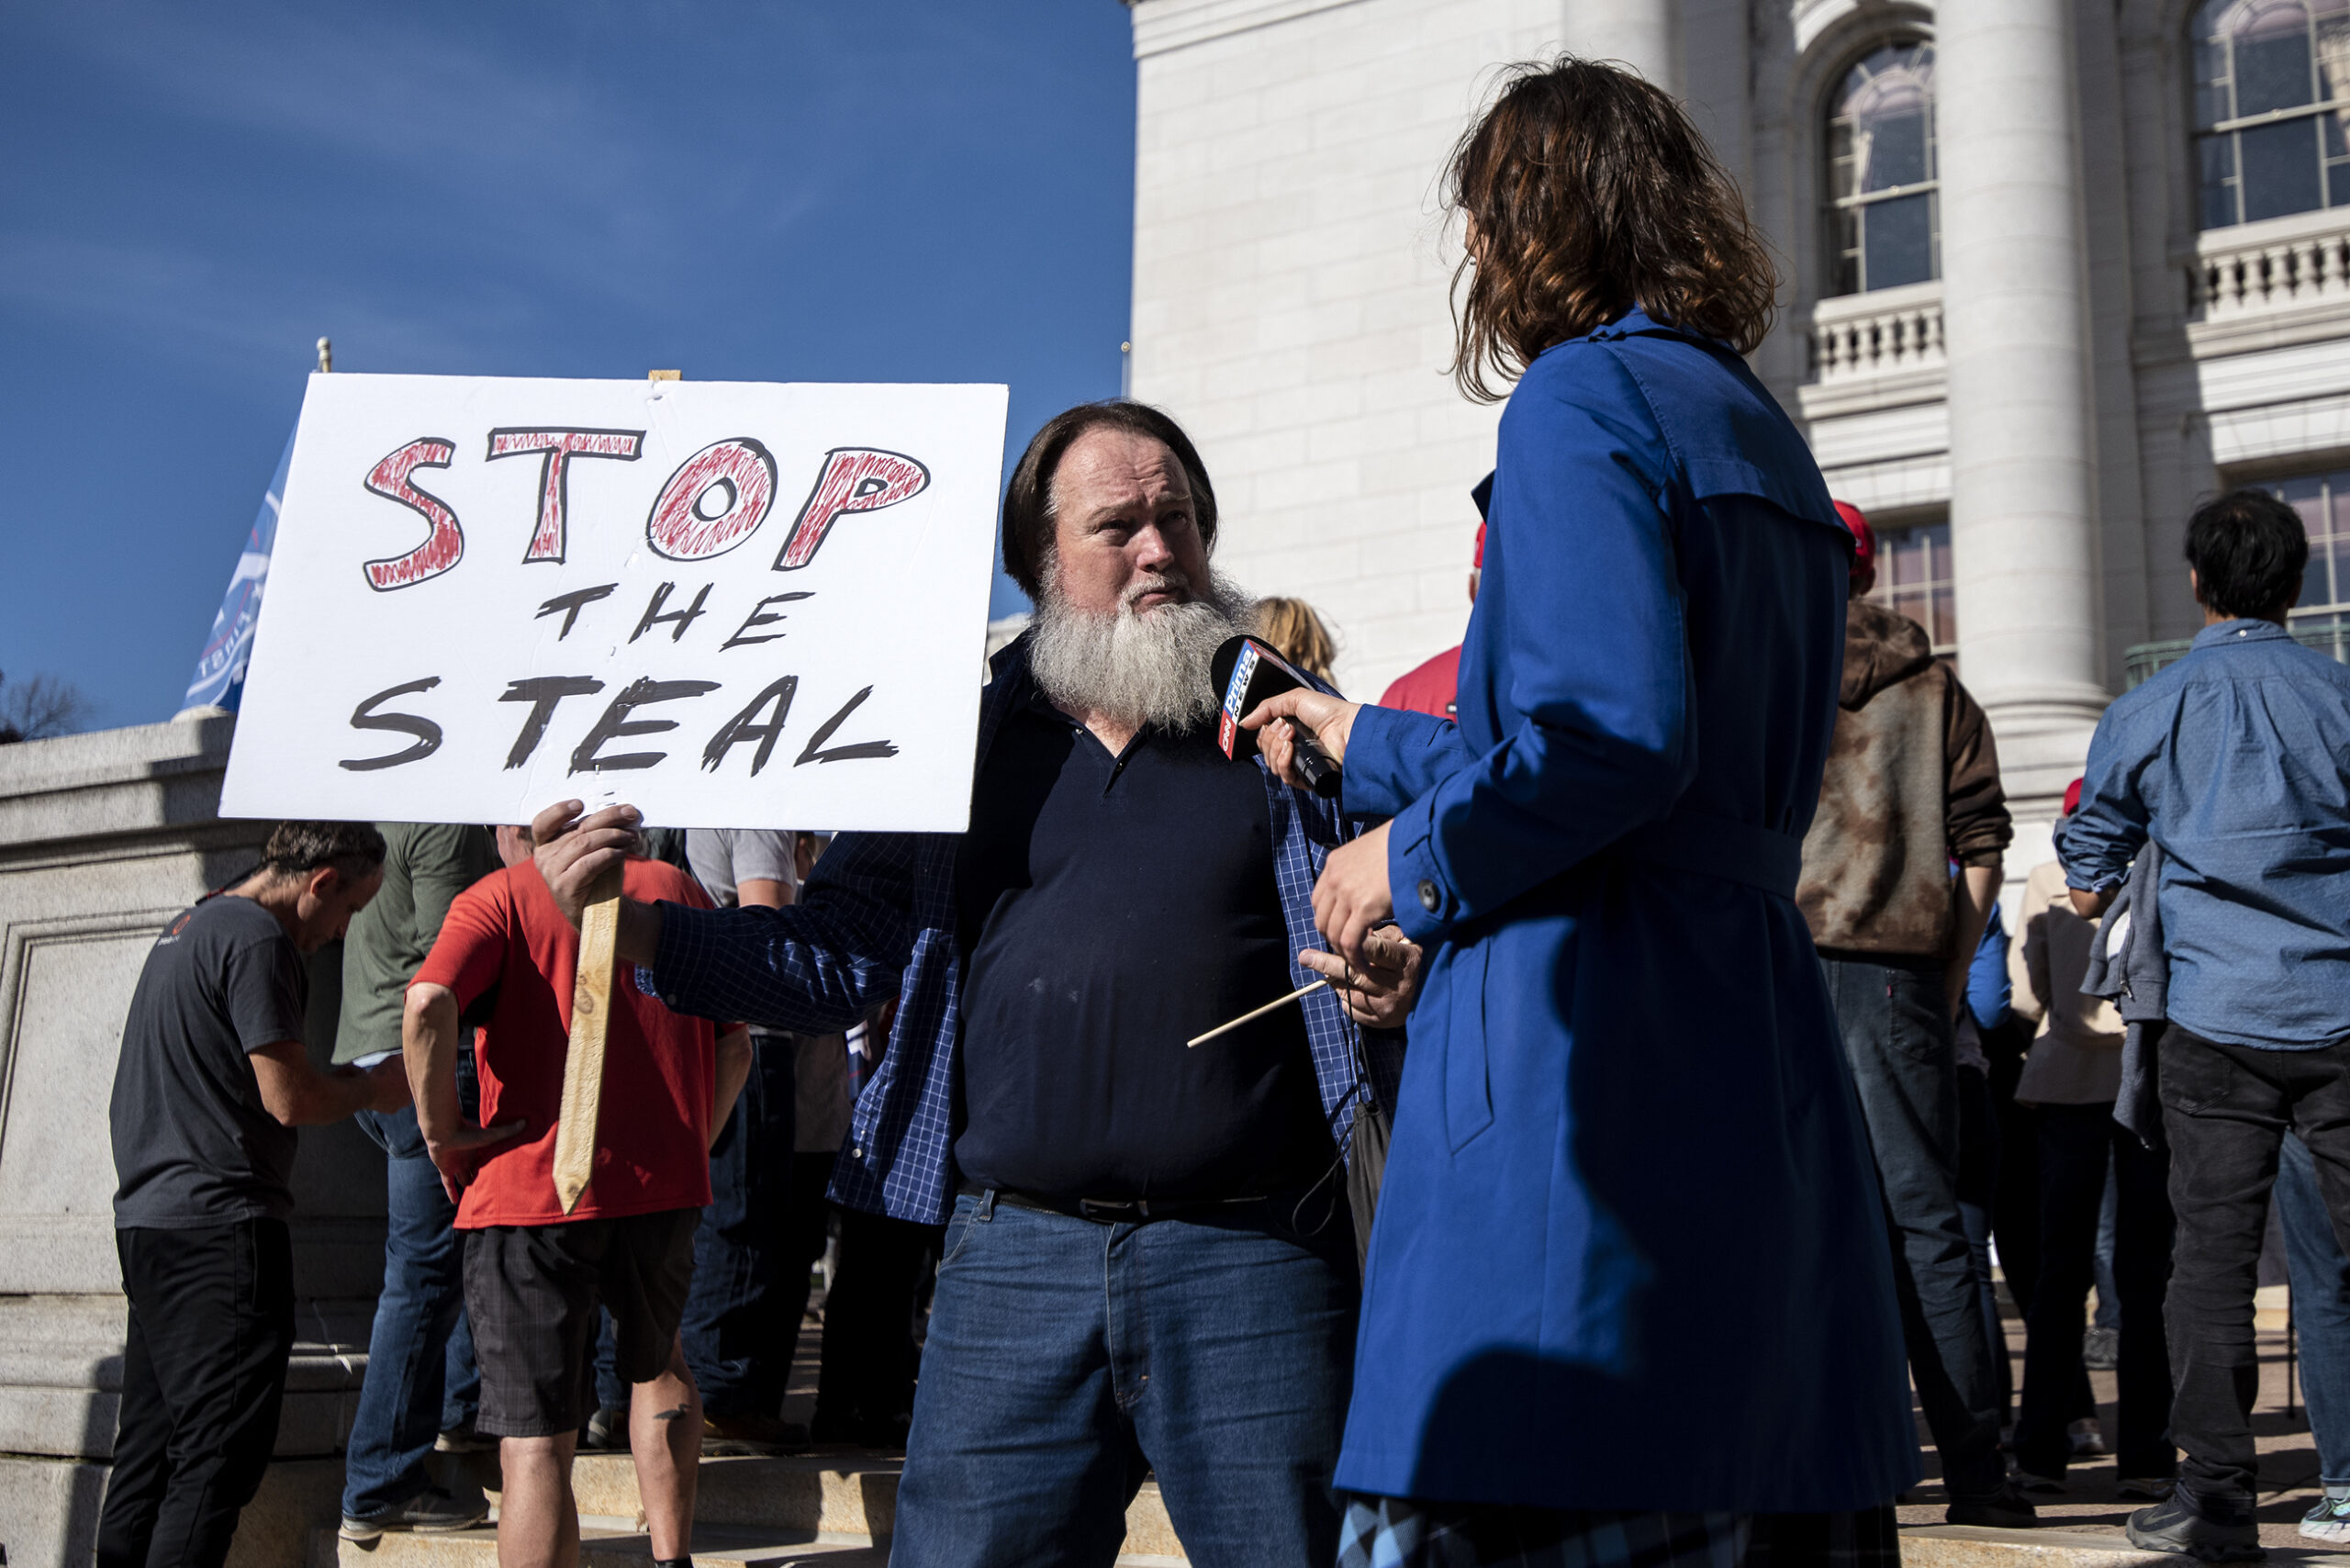 A man holds a sign that says "stop the steal"